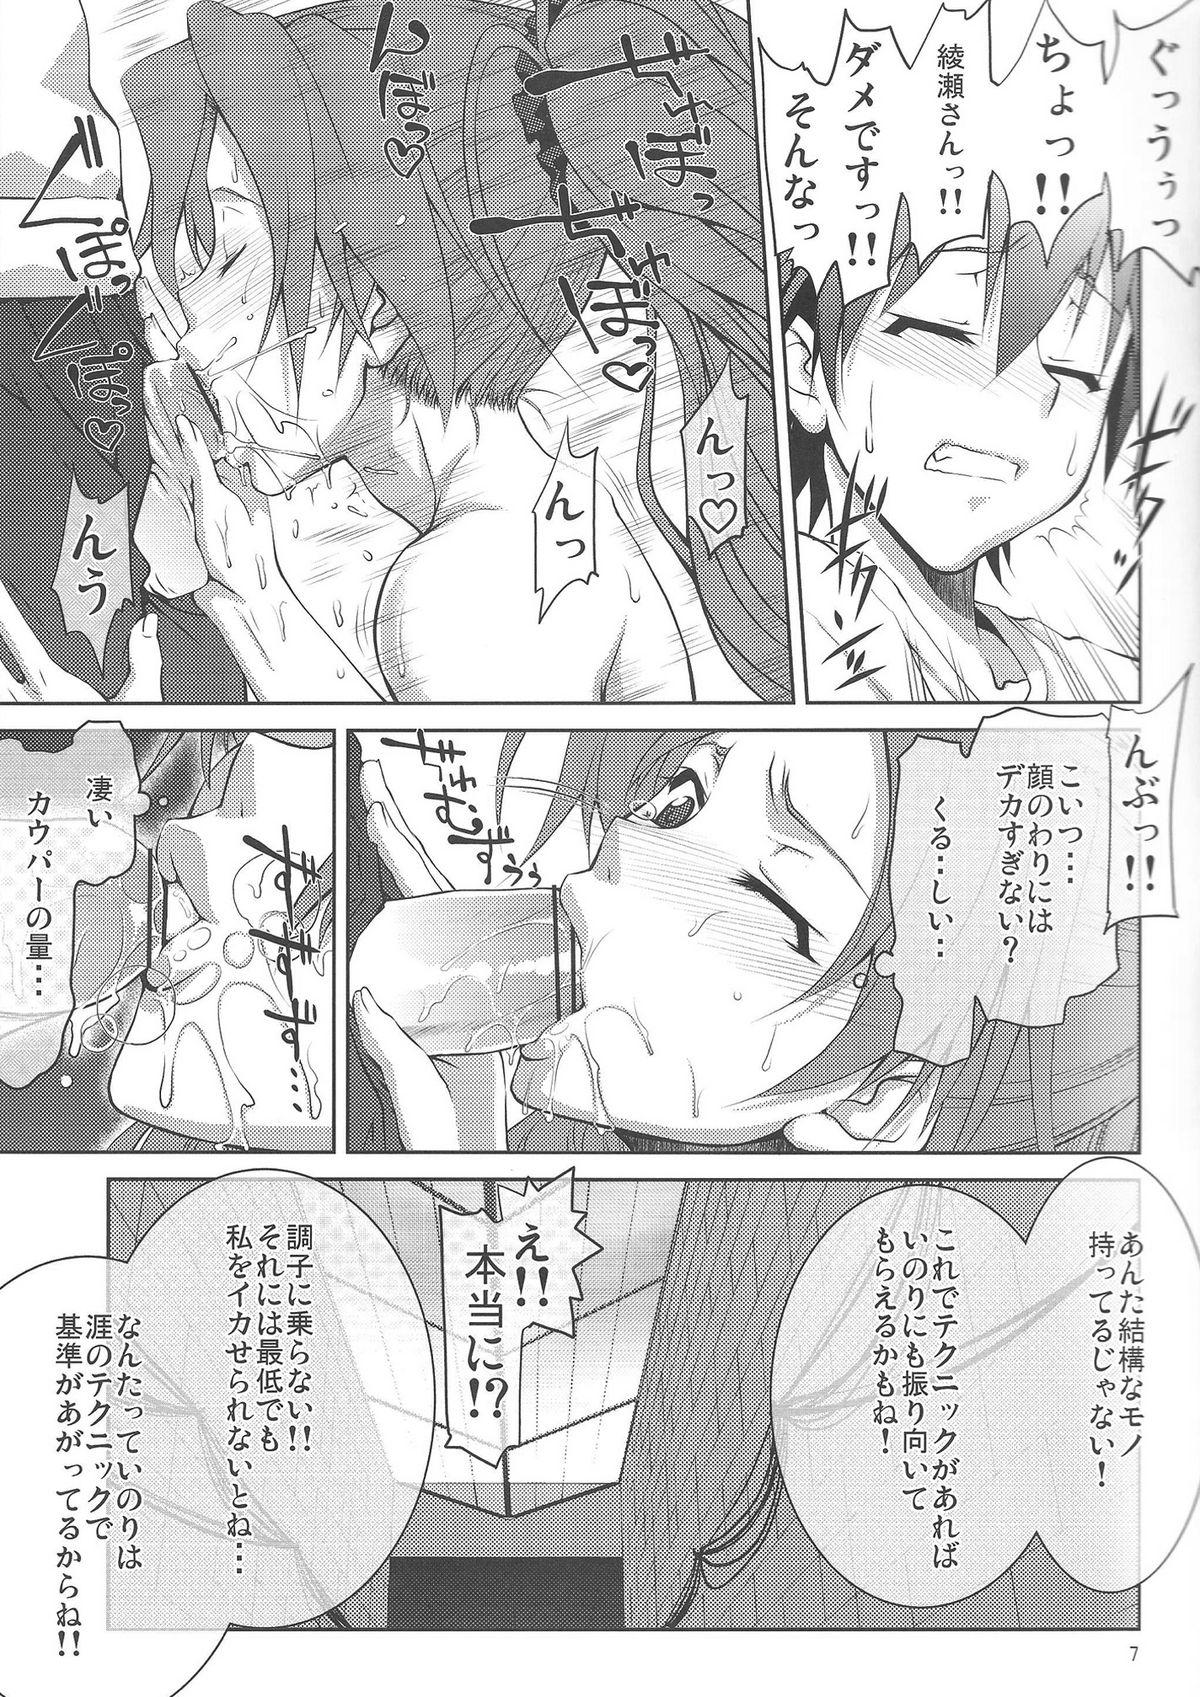 Missionary Position Porn Ayasebon - Guilty crown Analplay - Page 6